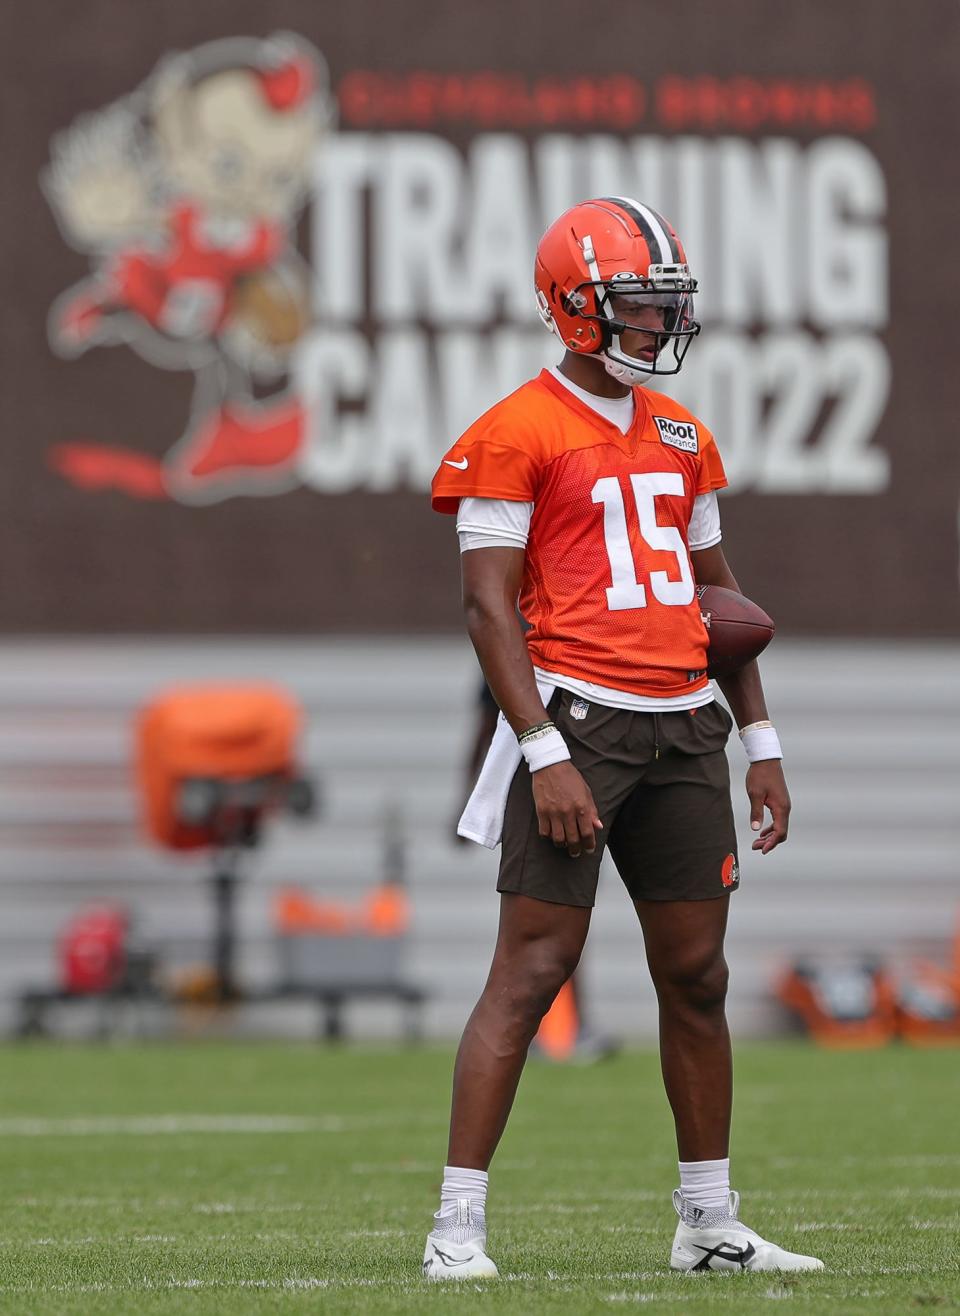 Cleveland Browns quarterback Joshua Dobbs watches from the sideline during the NFL football team's football training camp in Berea on Monday.